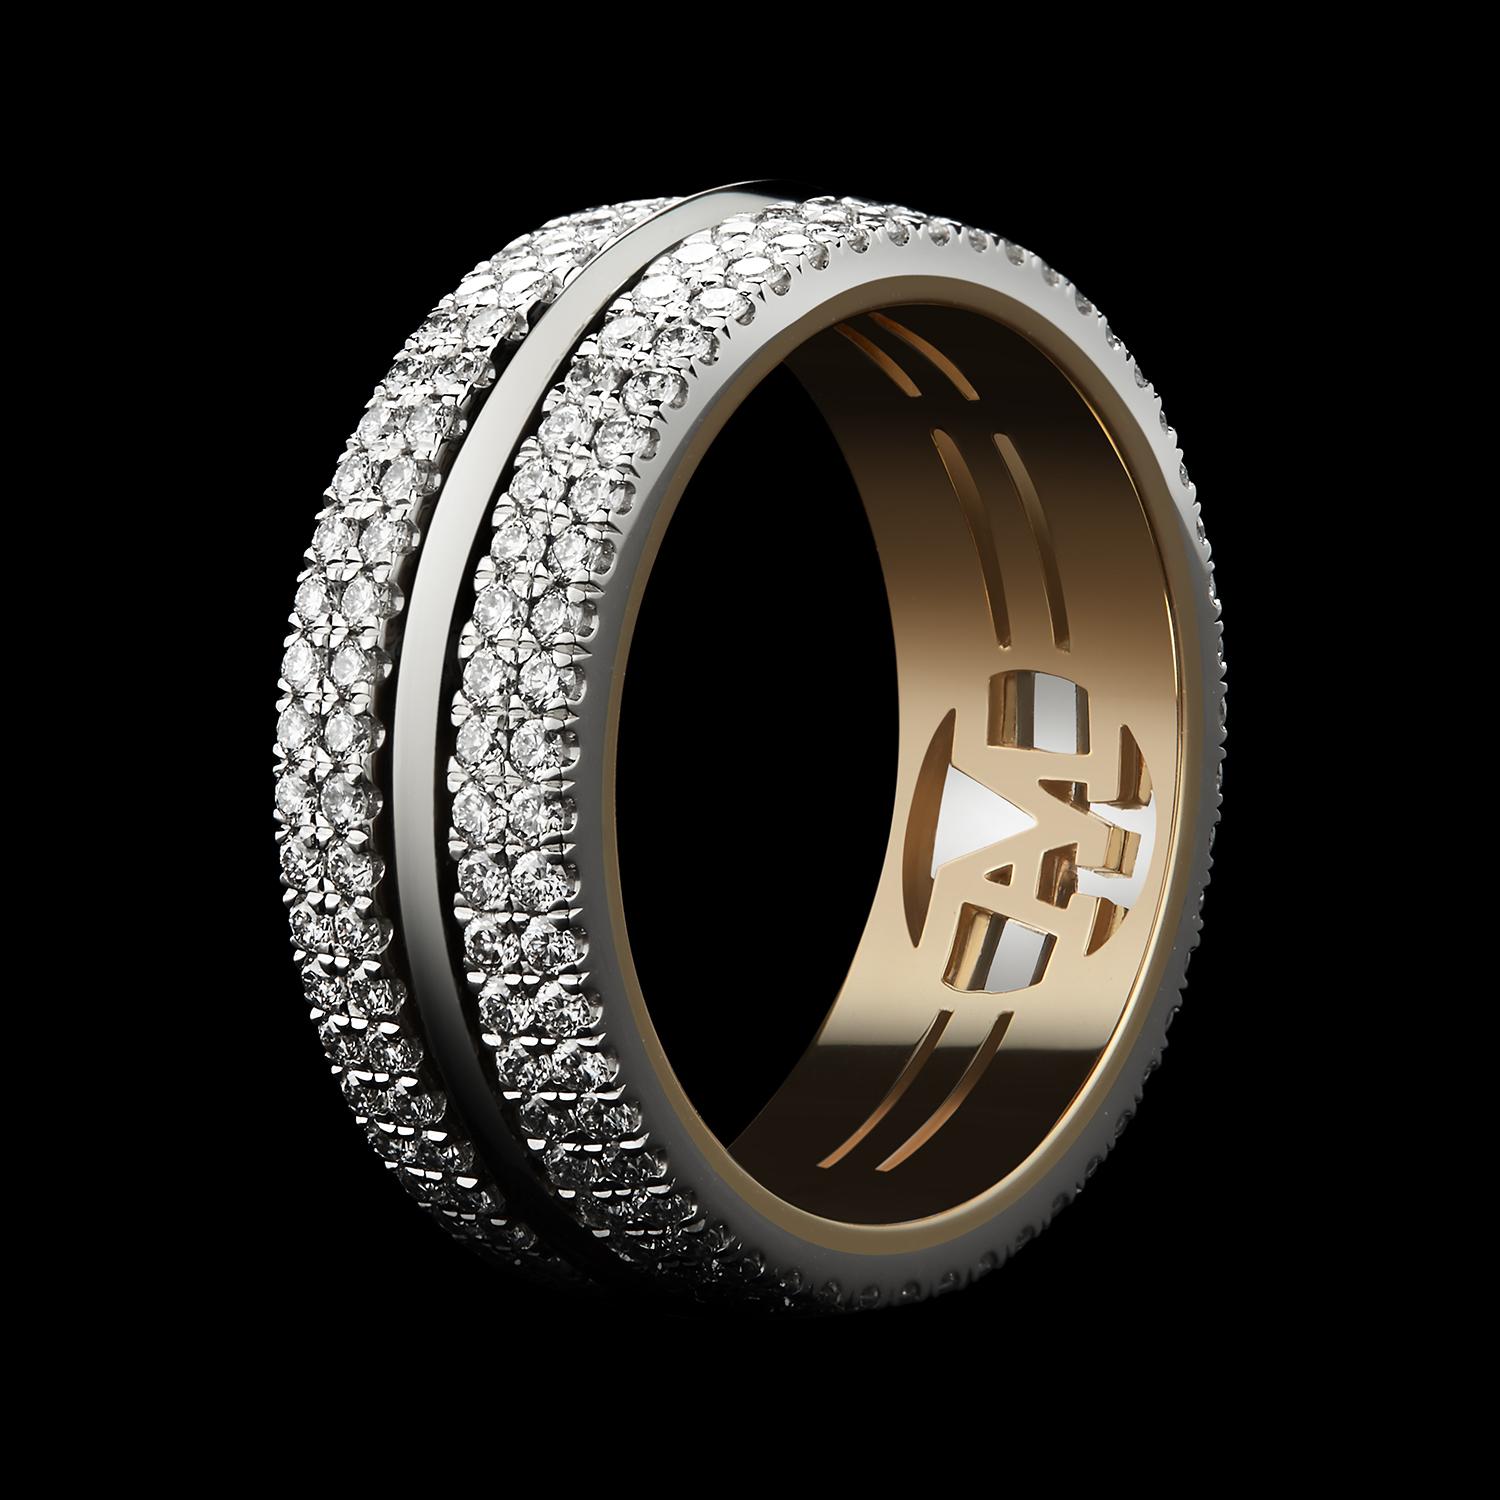 An Alexandra Mor limited edition Diamond eternity band featuring Alexandra Mor's signature details of 1mm melee bands and knife-edged wire, with an Alexandra Mor logo gallery. Ring is comprised of 208 1mm Diamond melees weighing 1.24 carats. Ring is